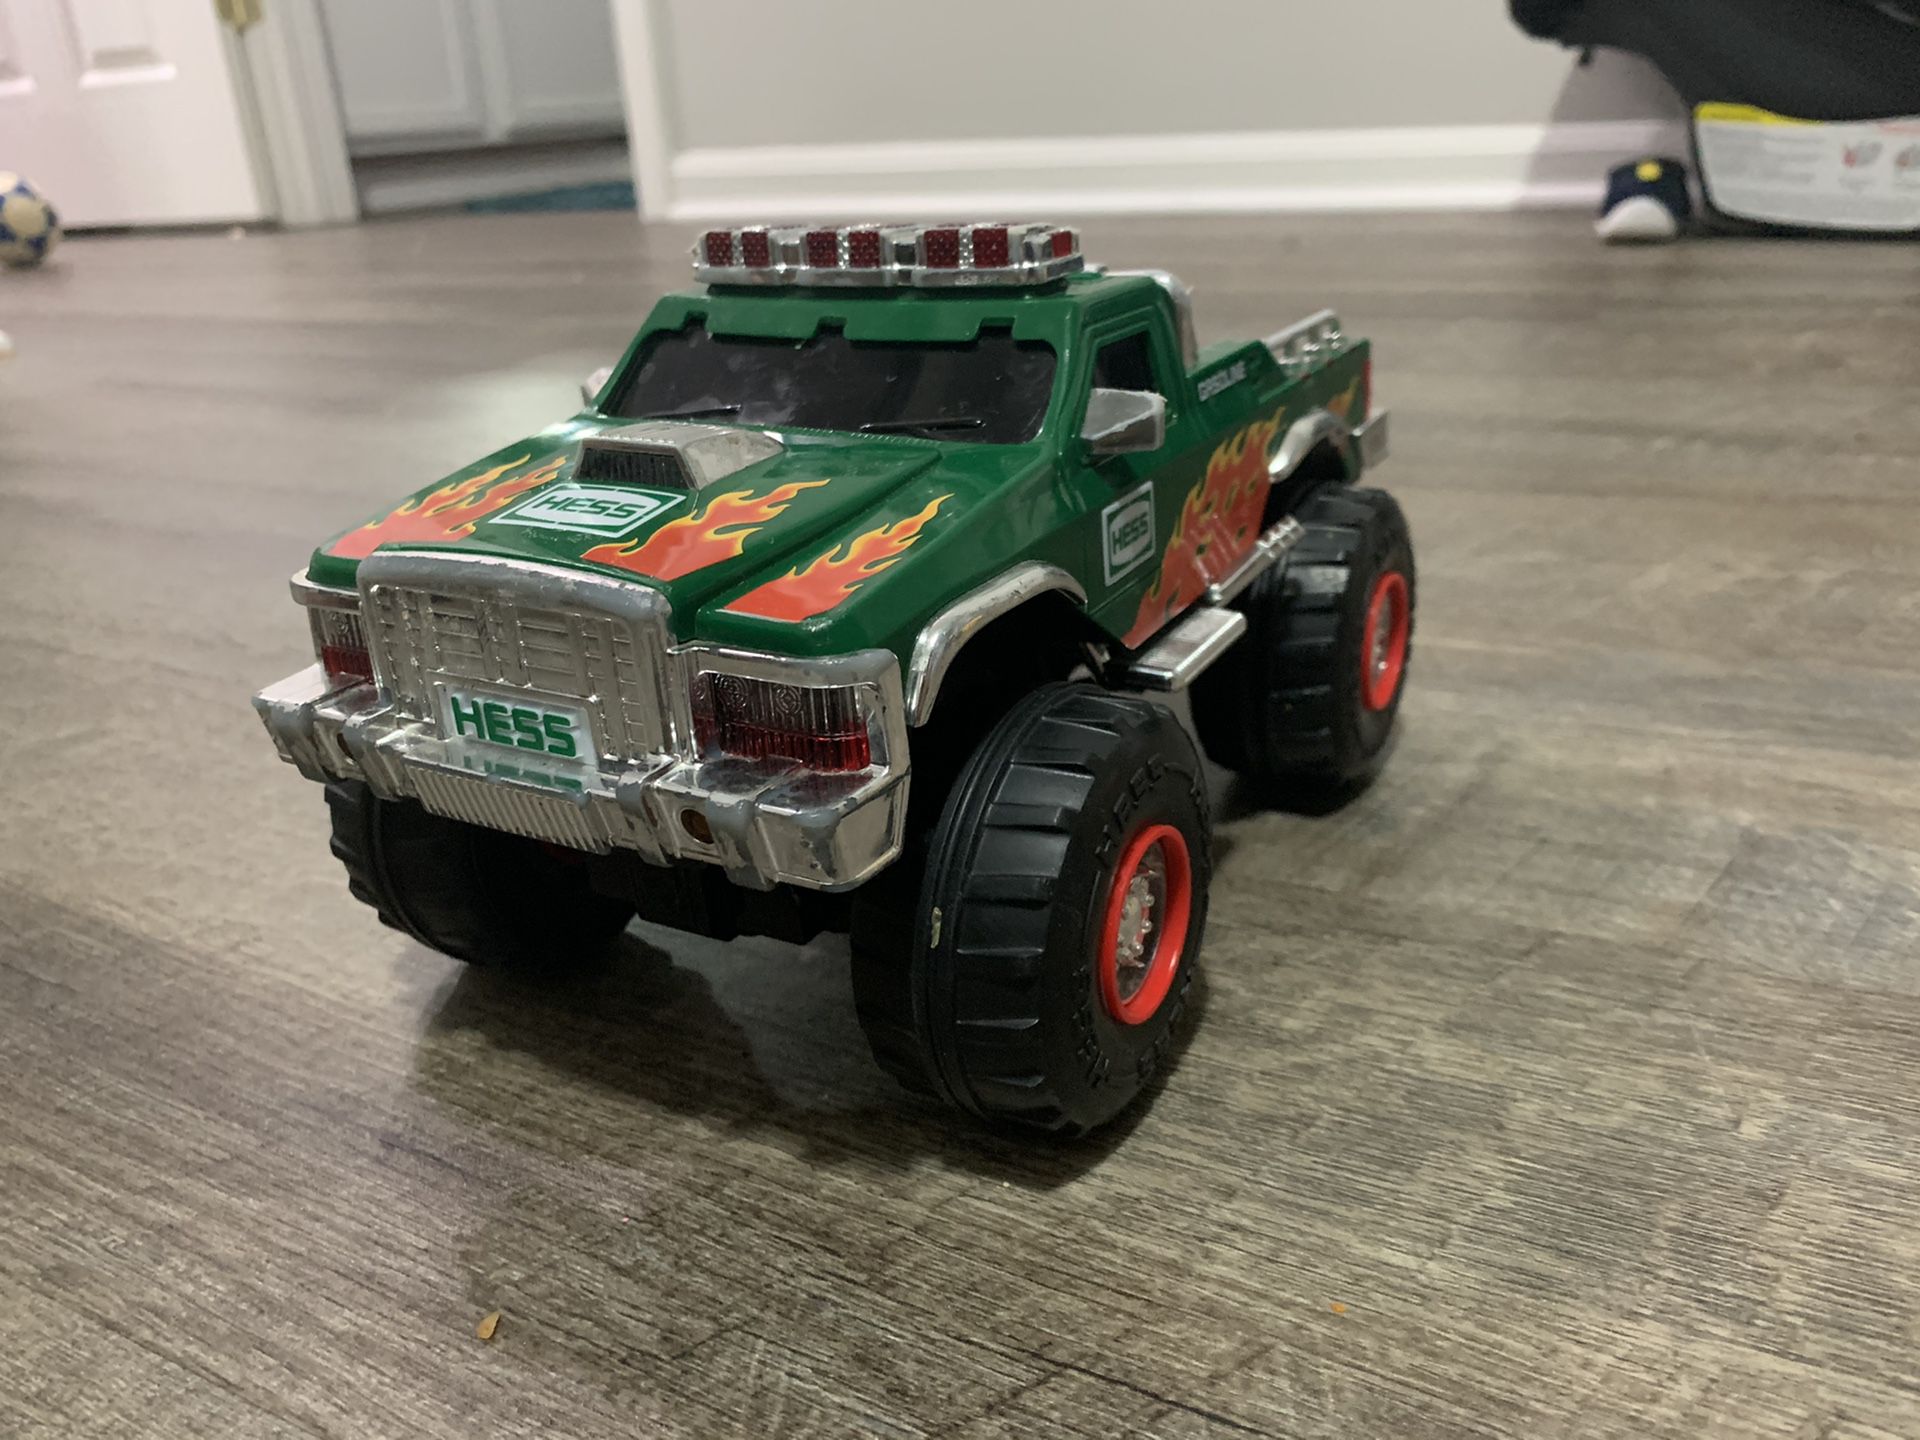 Hess Monster Truck Toy 10" Collectible